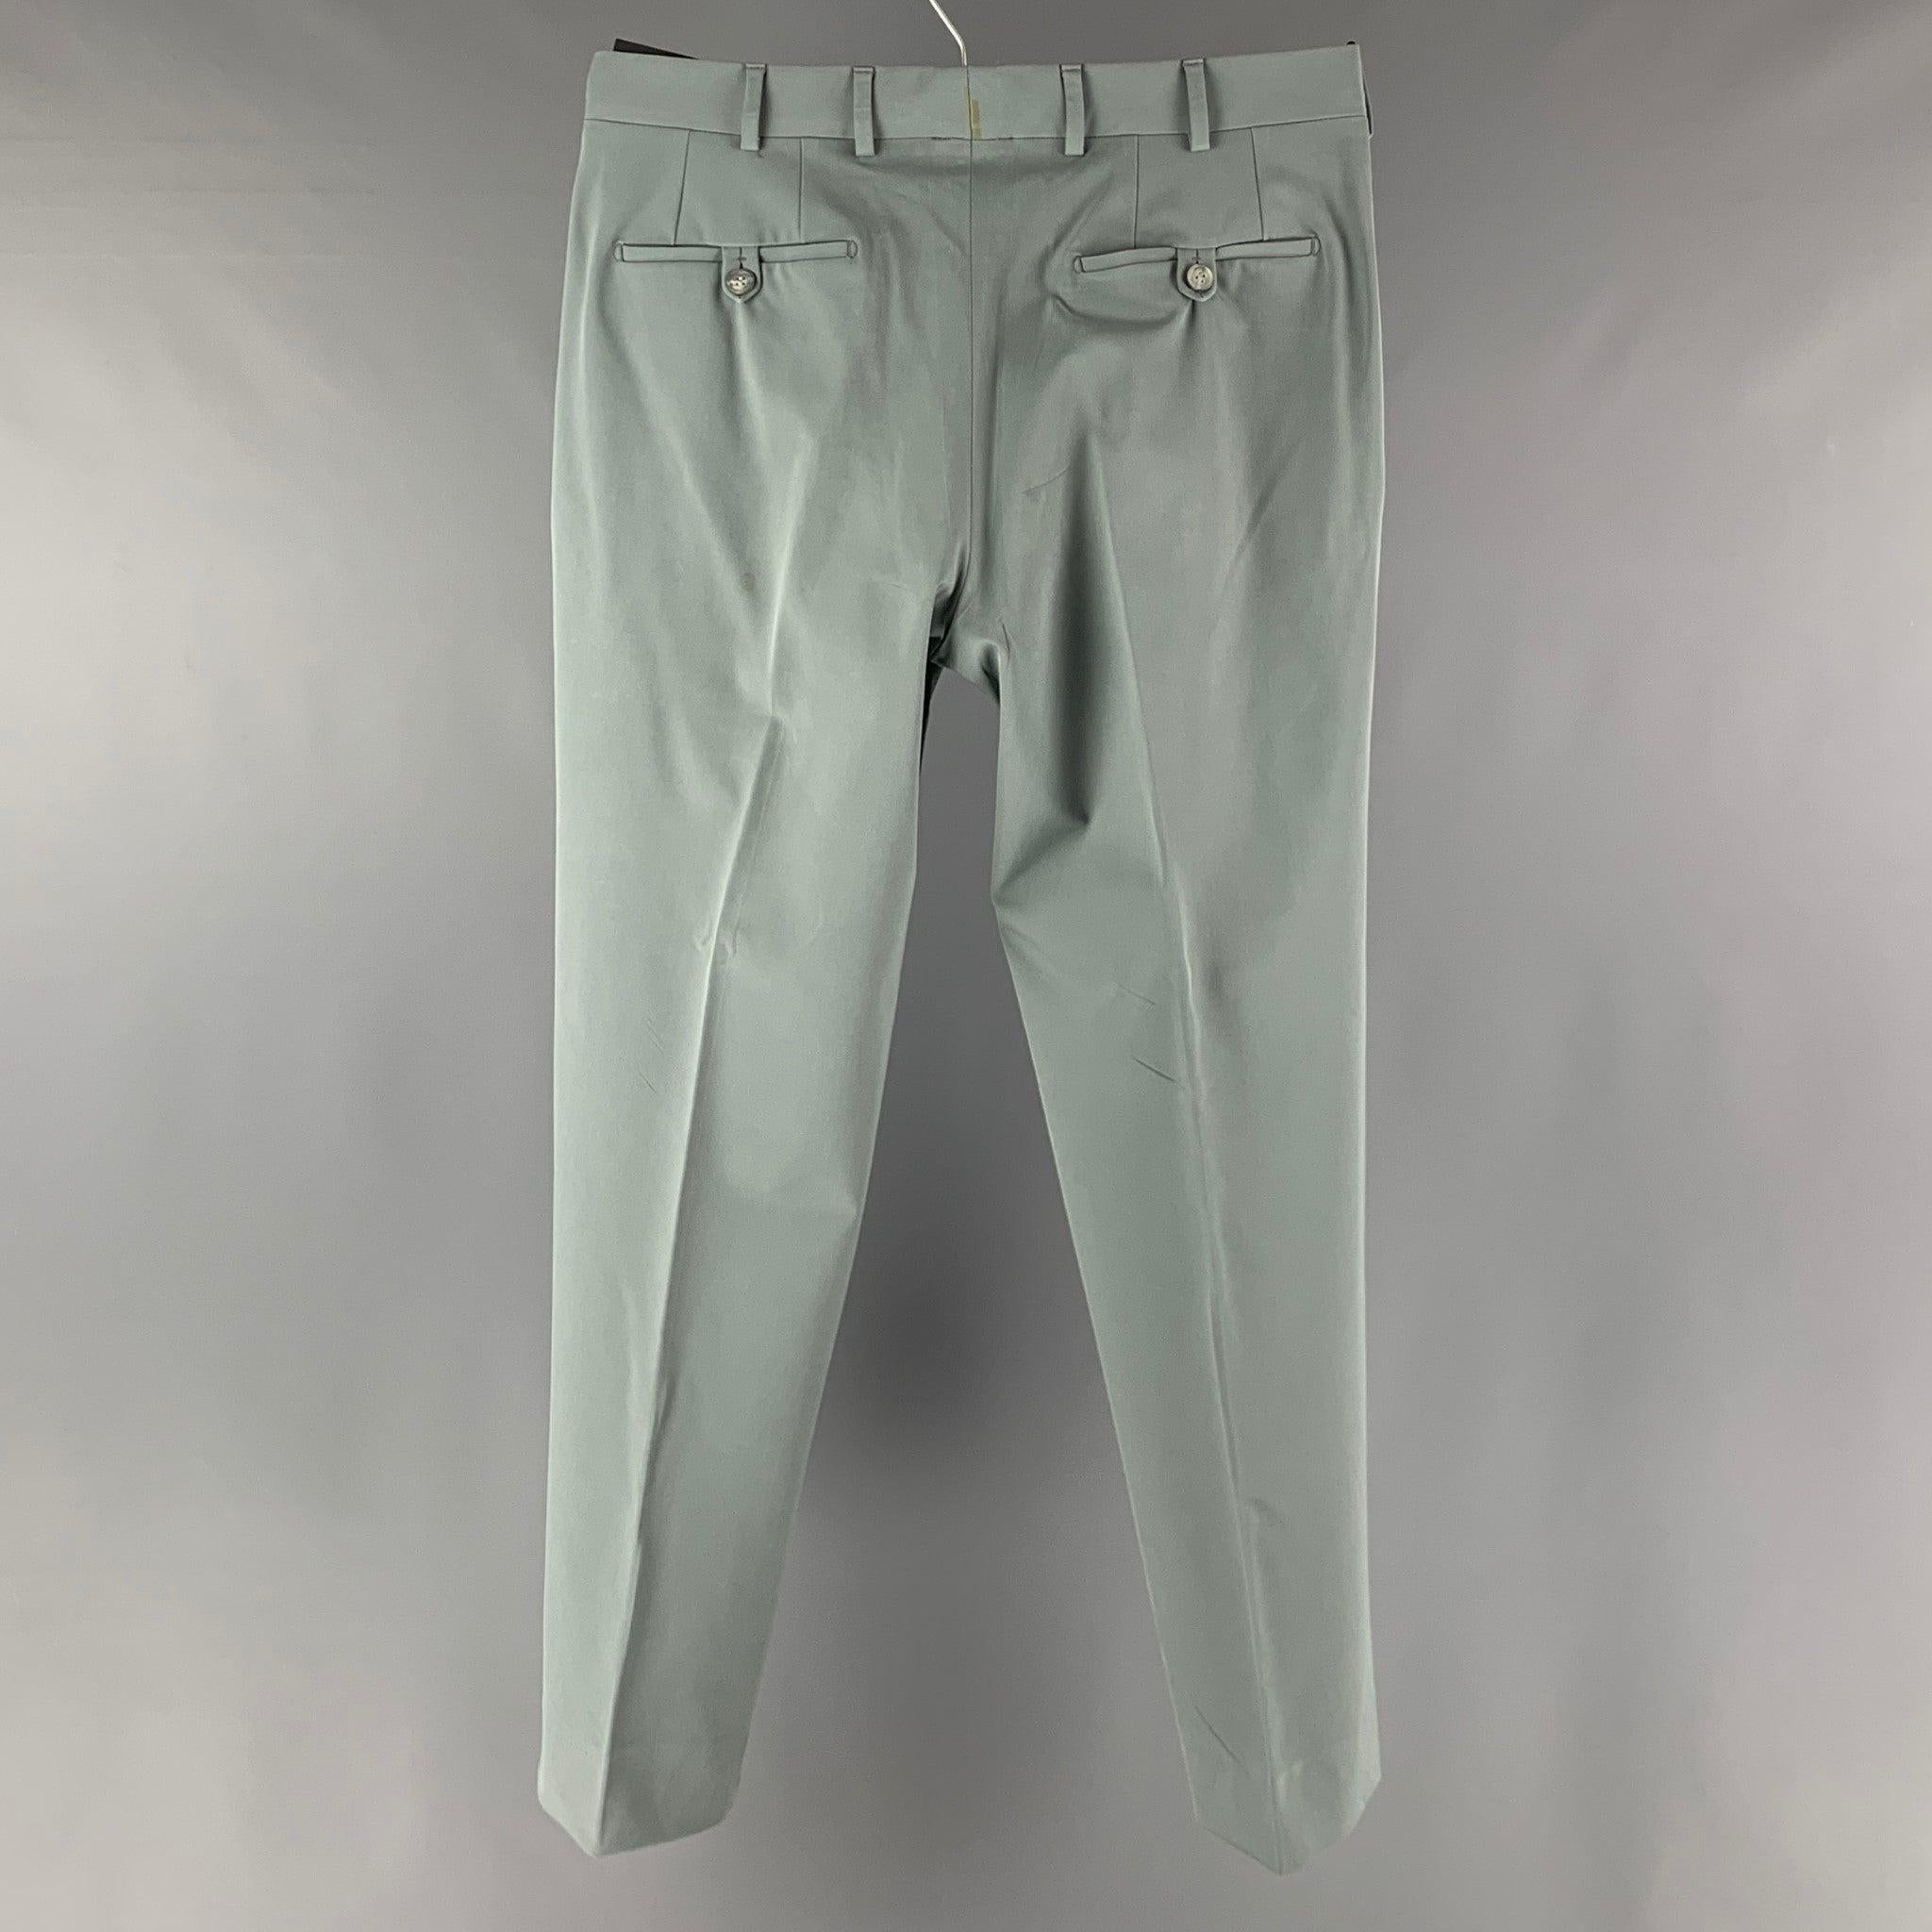 PRADA casual pants comes in a grey polyester blend knit material featuring a regular fit, flat front, and a button zipper fly closure. Made in Italy.Very Good Pre- Owned Conditions. Altered. 

Marked:  48 

Measurements: 
 Waist: 32 inches Rise: 9.5